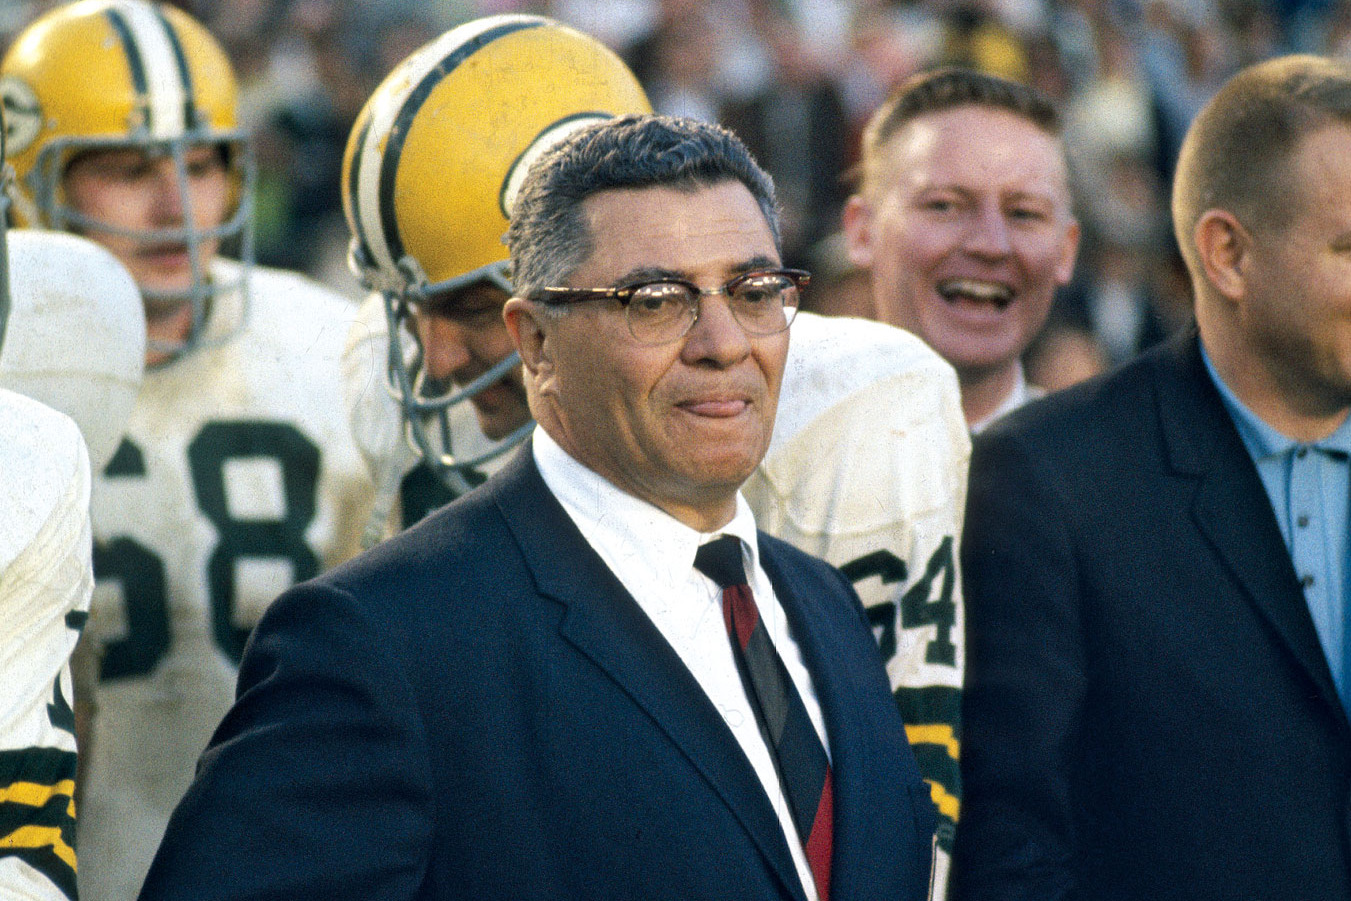 Vince Lombardi wearing a blue suit and eyeglasses